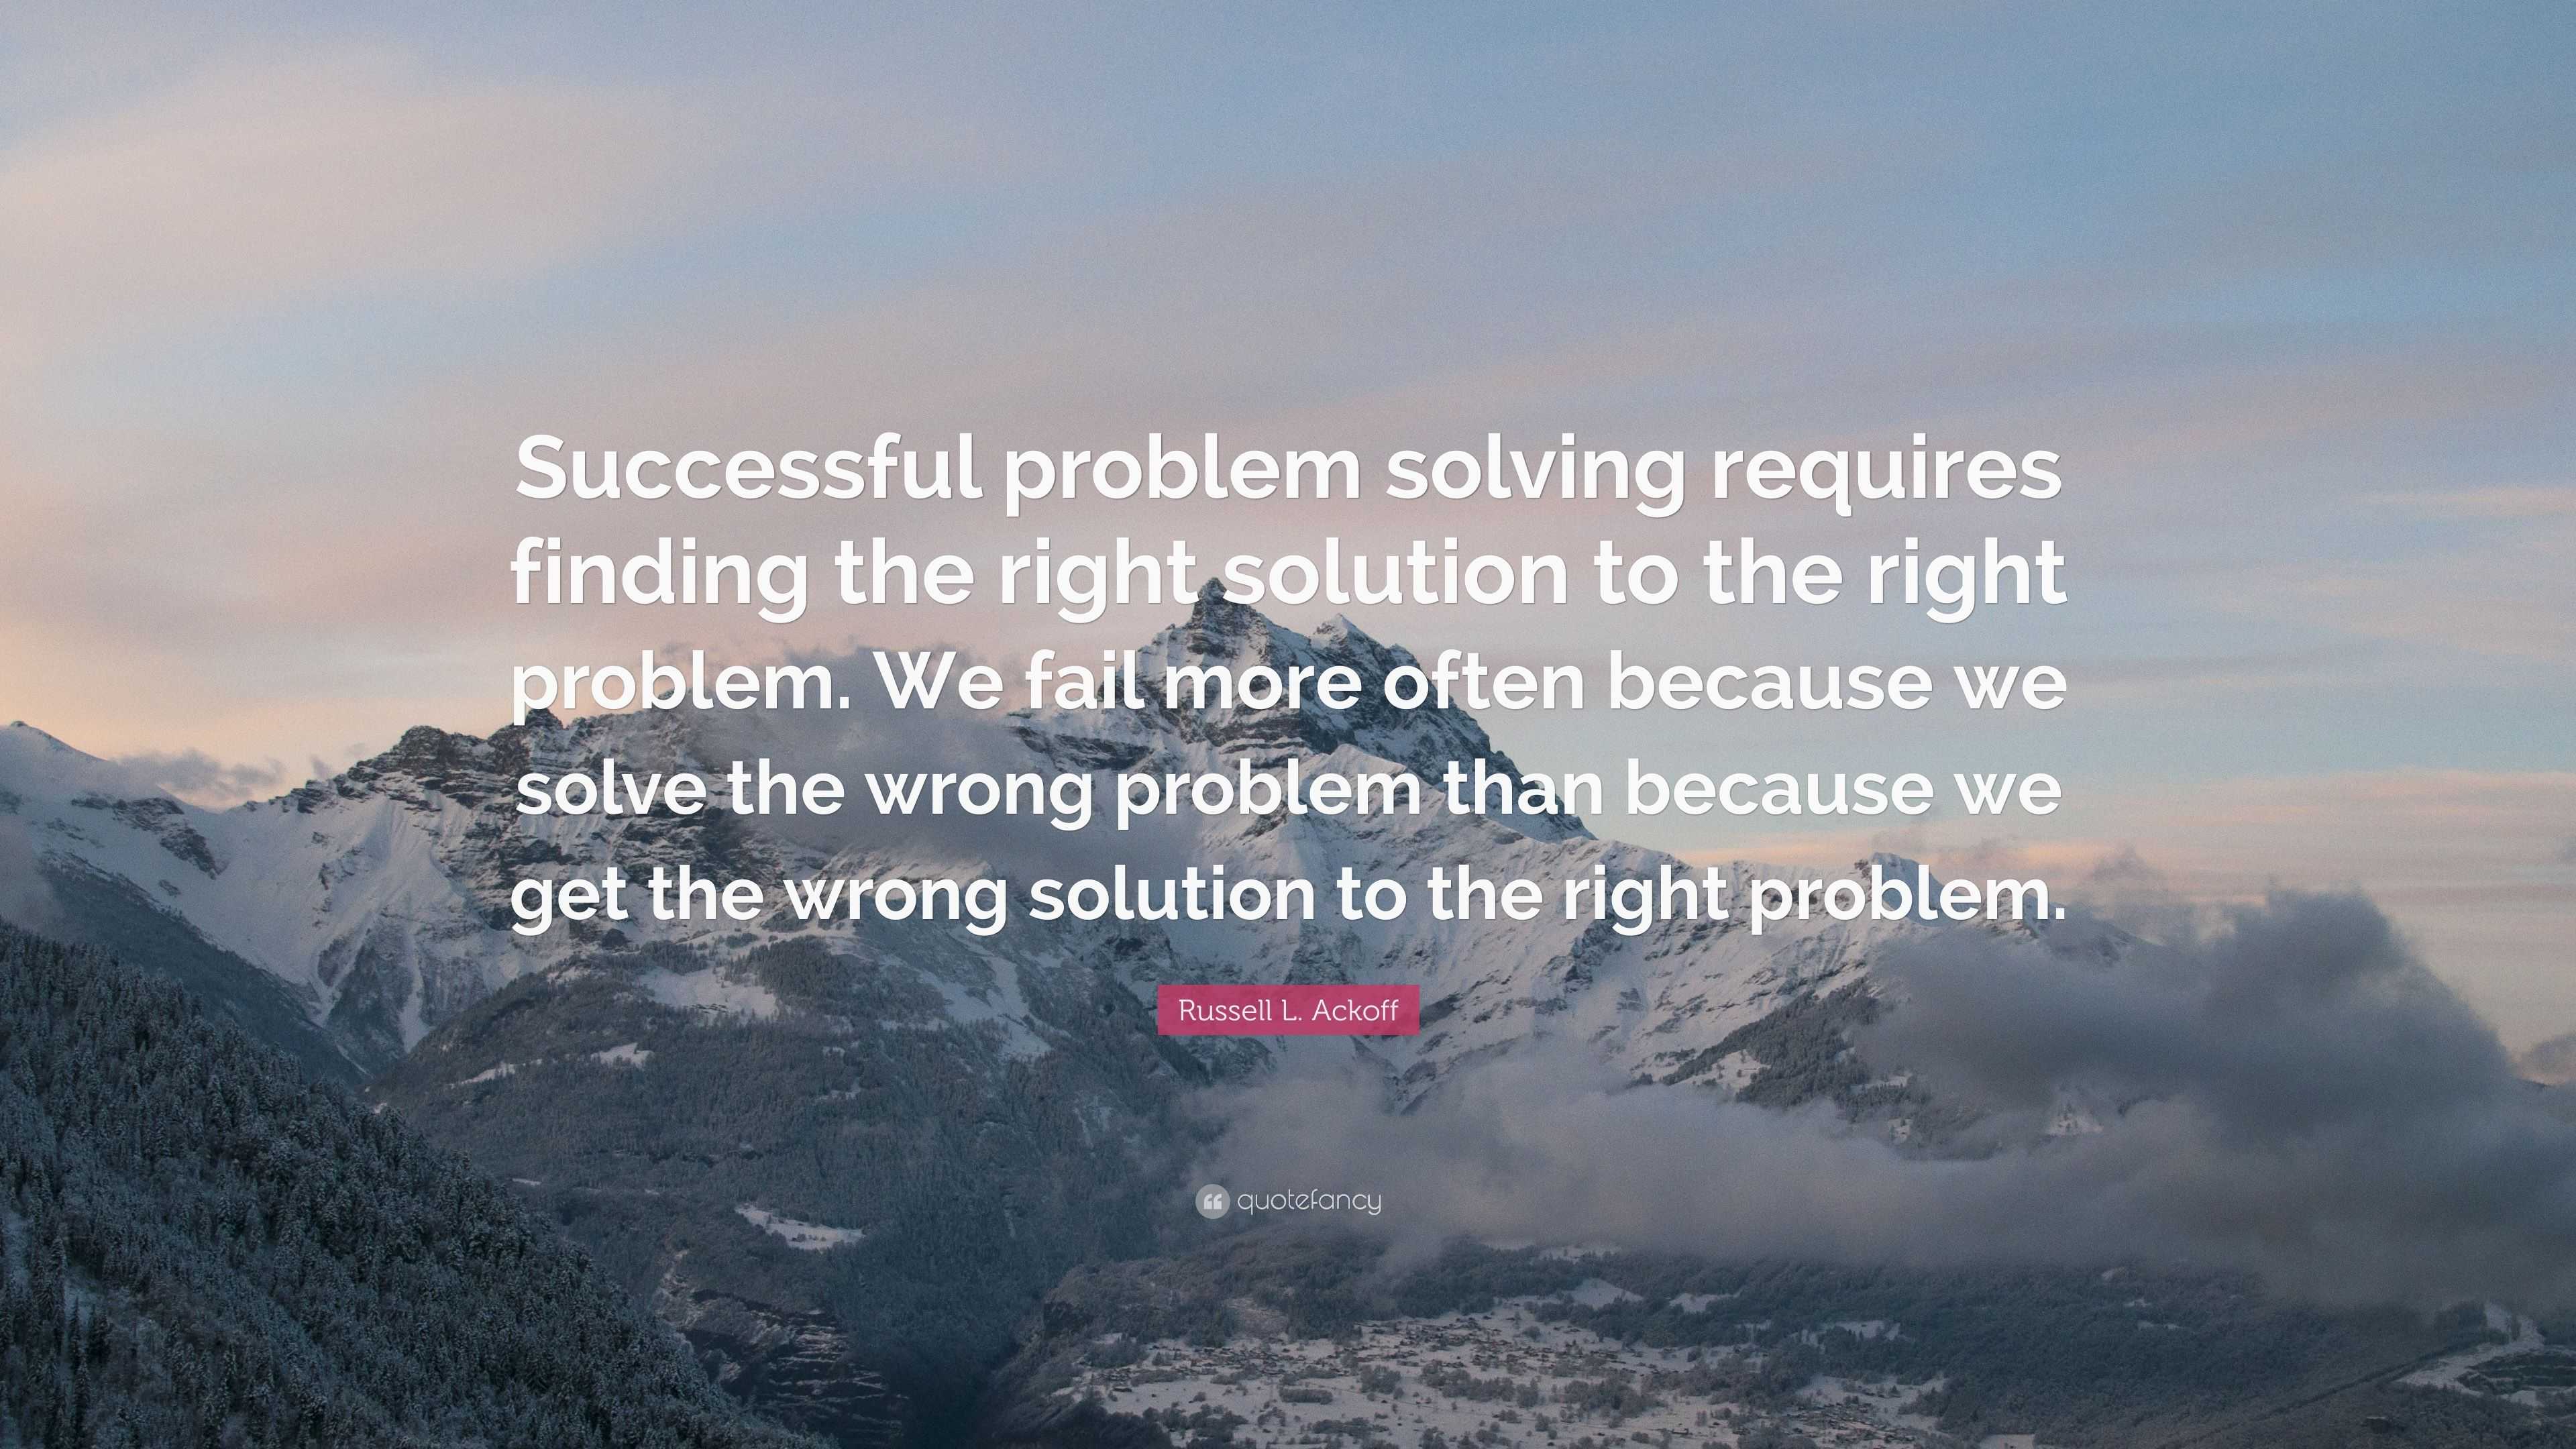 famous quotes on problem solving